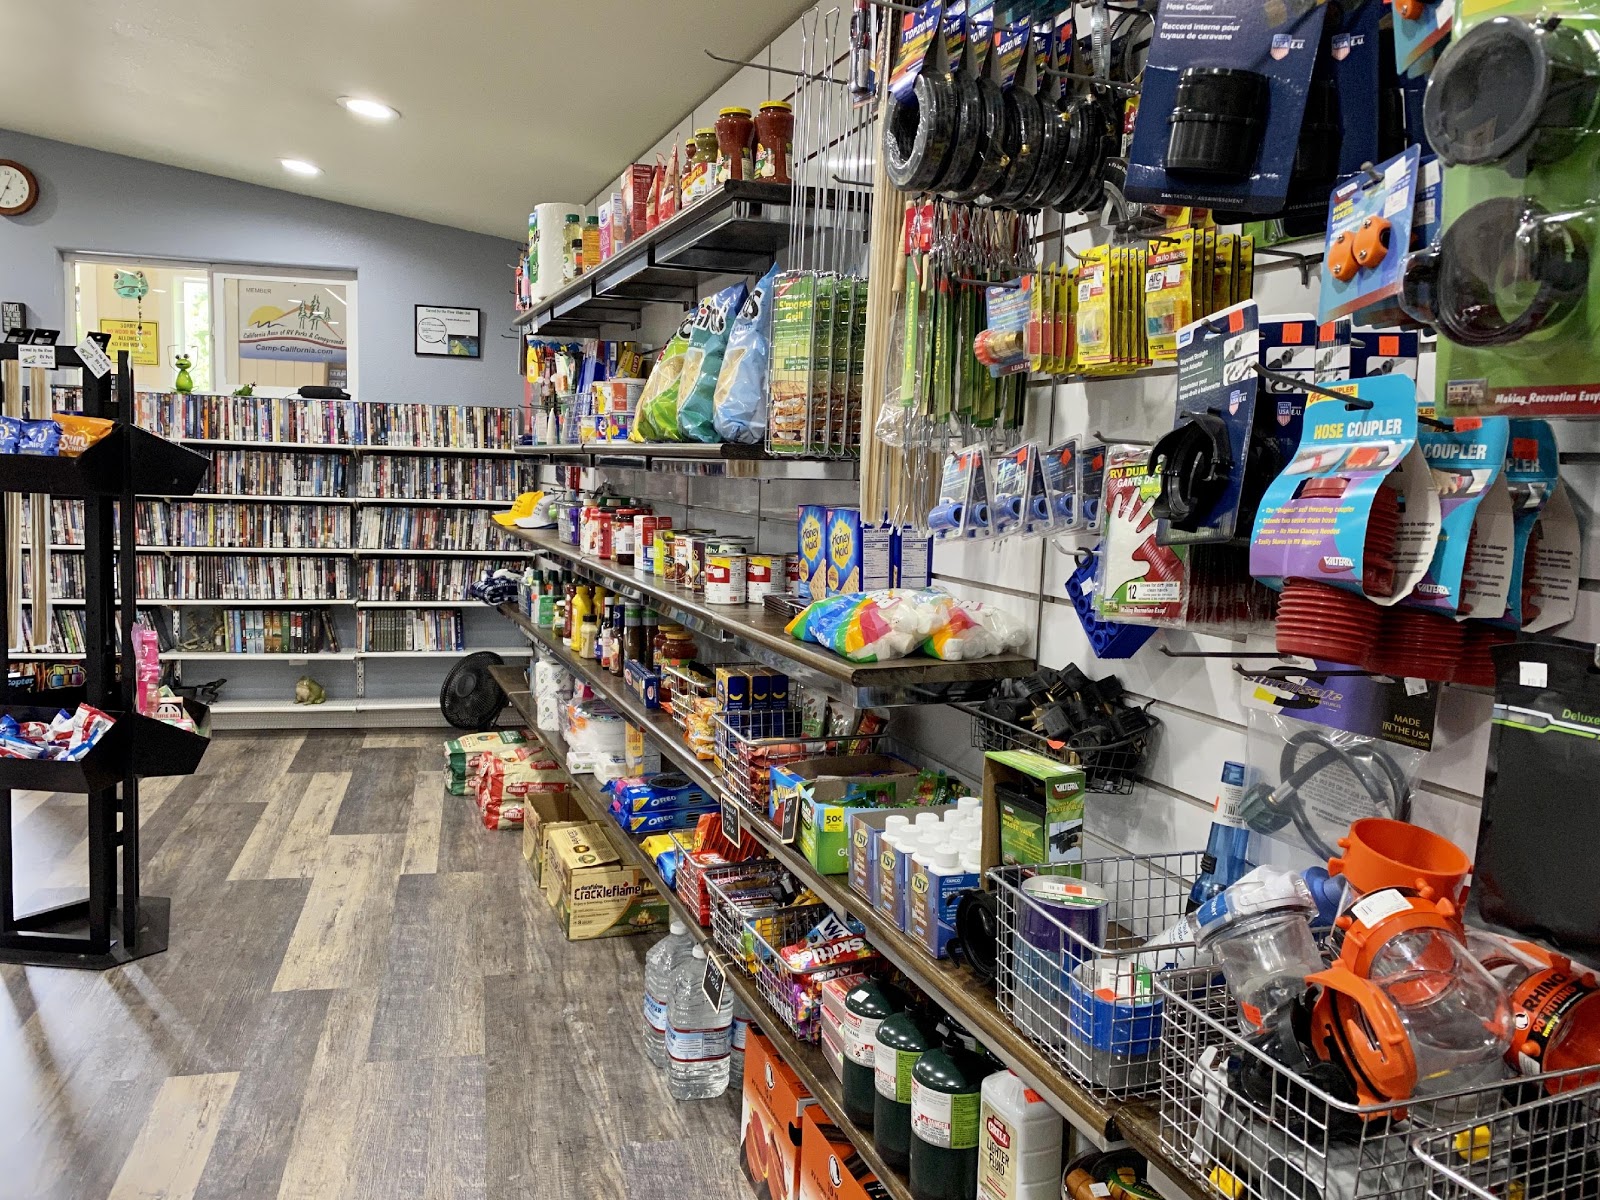 Our general store in the main office is here to provide you with common RV supplies, staple snacks, cold soft drinks, and camping food. We also have a large collection of DVDs for rent.